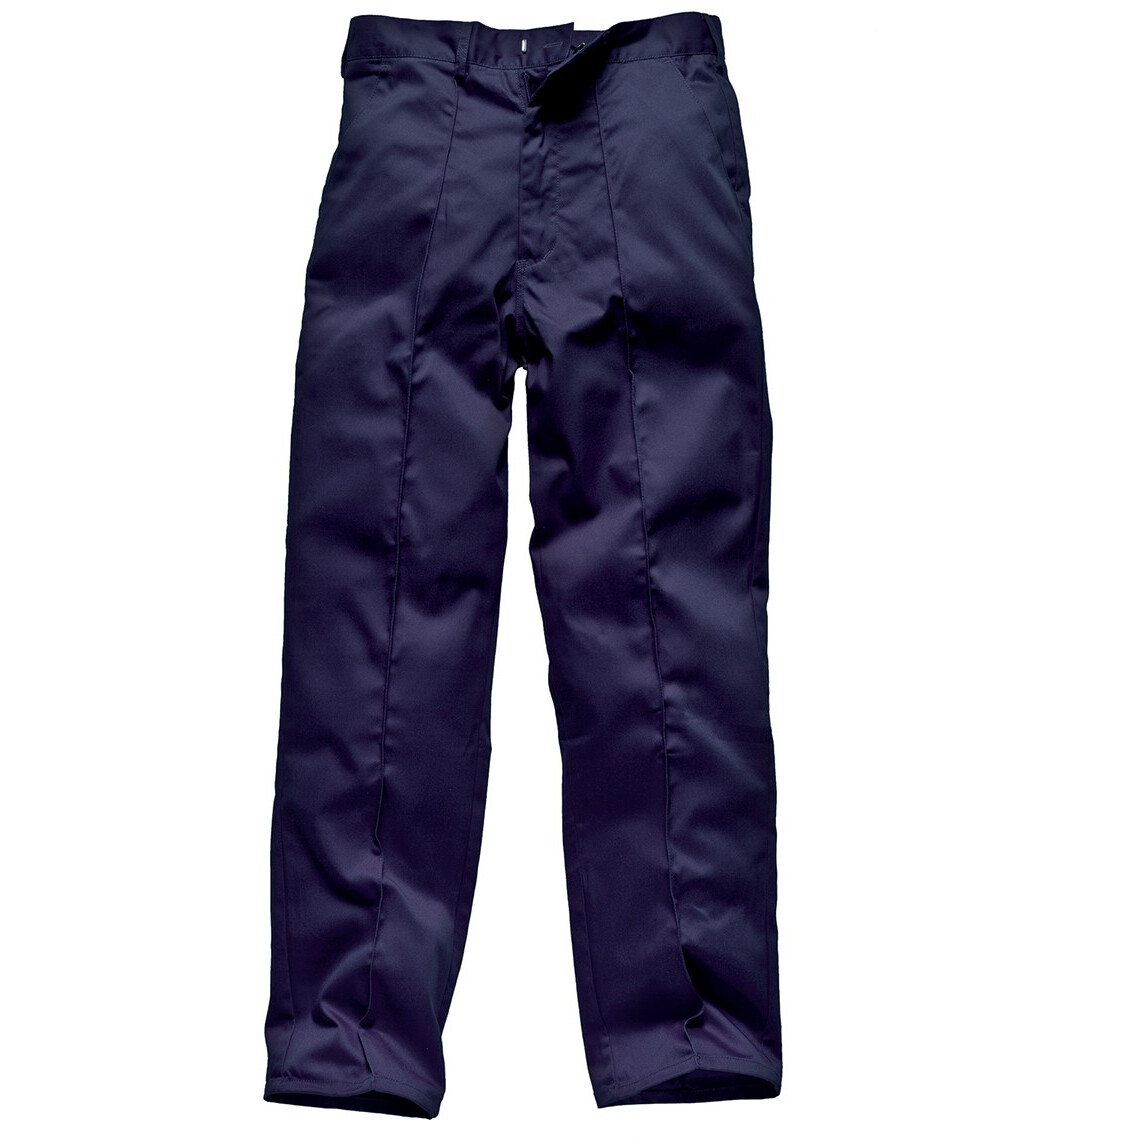 Dickies WD864 Redhawk Mens Work Trousers - Navy Blue - WAIST 40, Tall Leg  from Lawson HIS